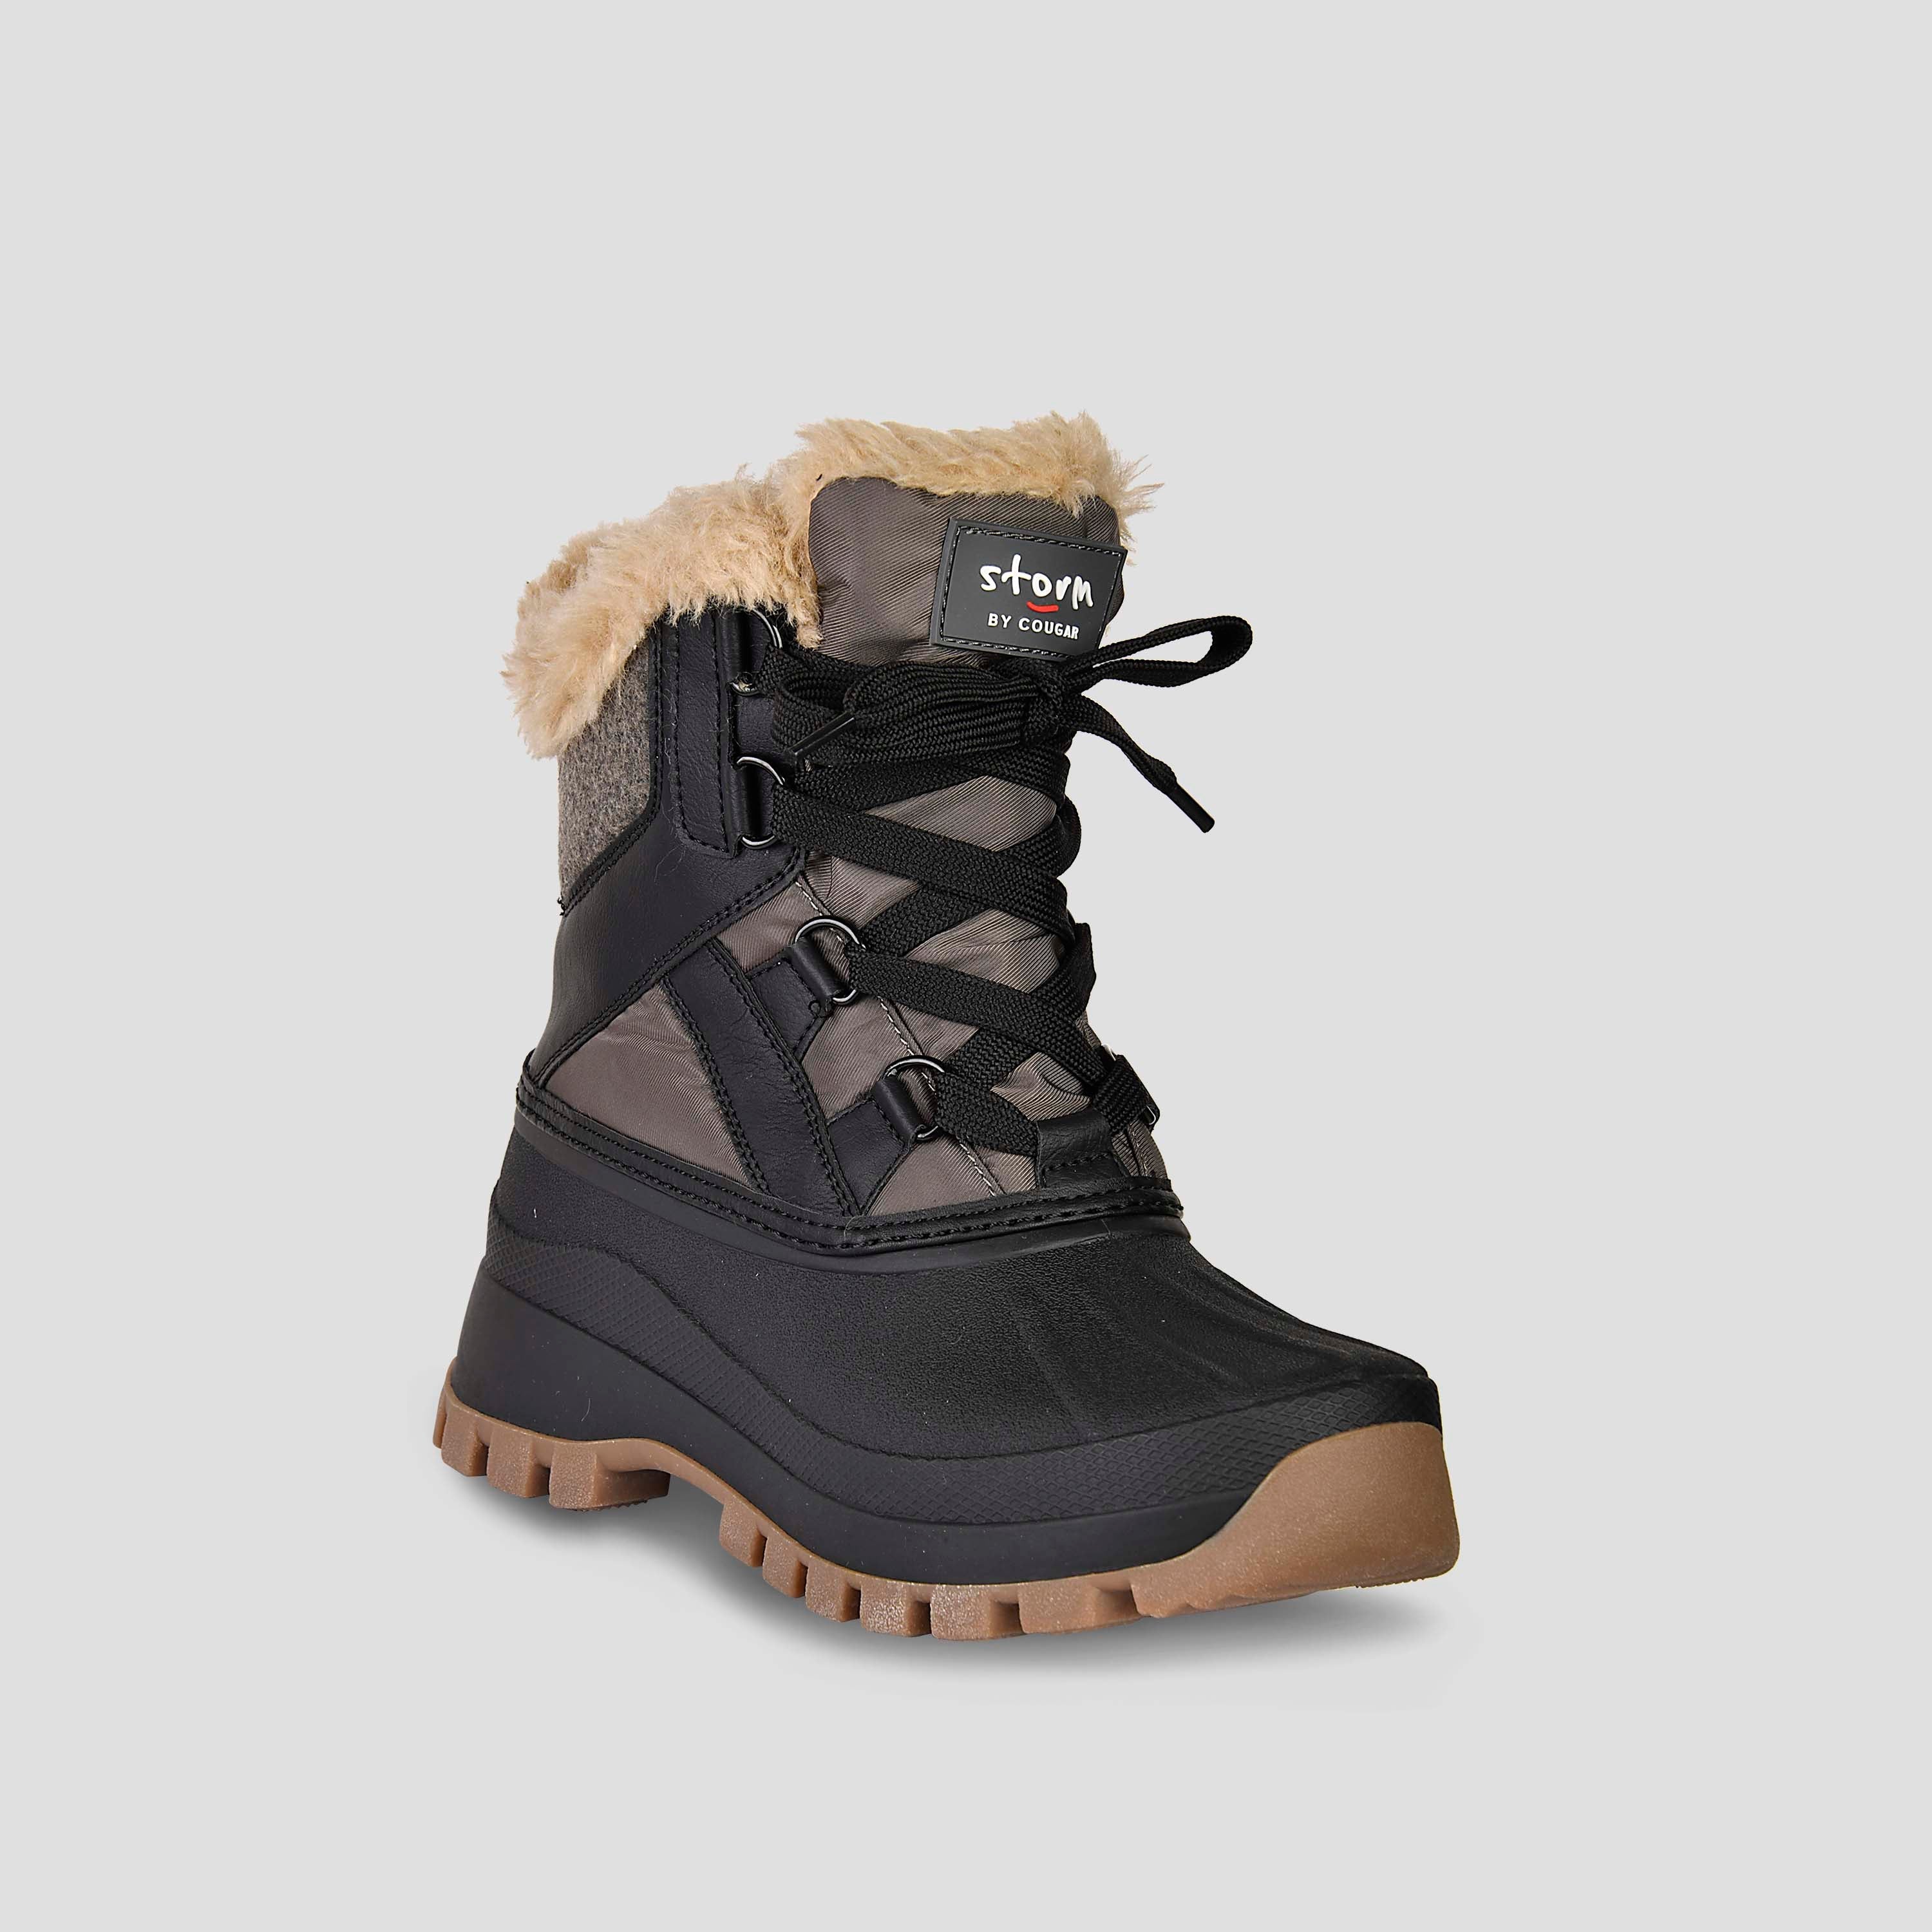 Fury Nylon Women's Winter Boot - Storm by Cougar | Cougar Shoes US